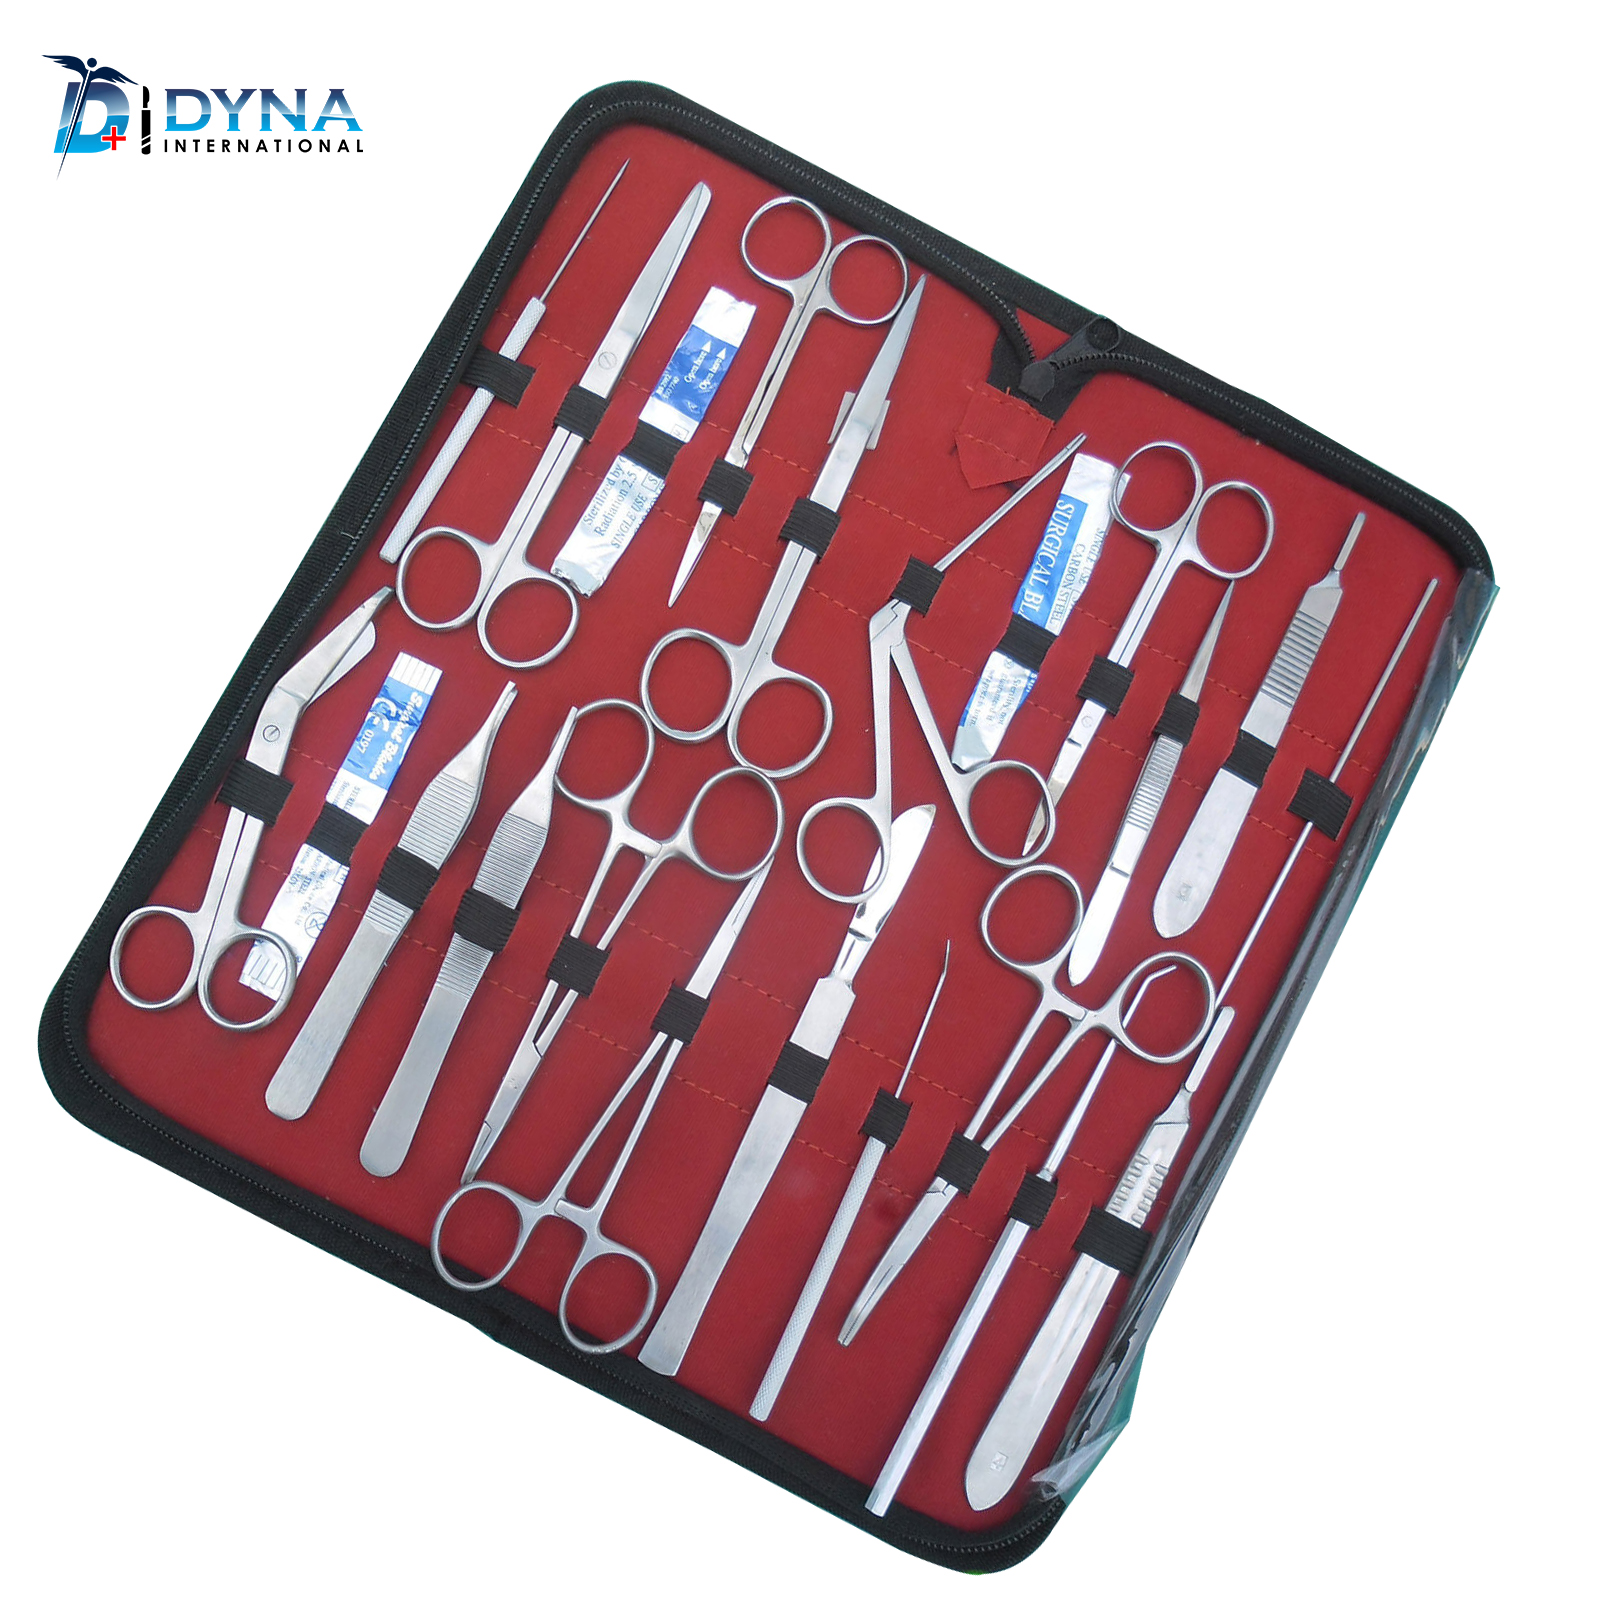 49-PC-U.S-MILITARY-FIELD-DISSECTION-SURGICAL-VETERINARY-INSTRUMENTS-KIT1.jpg